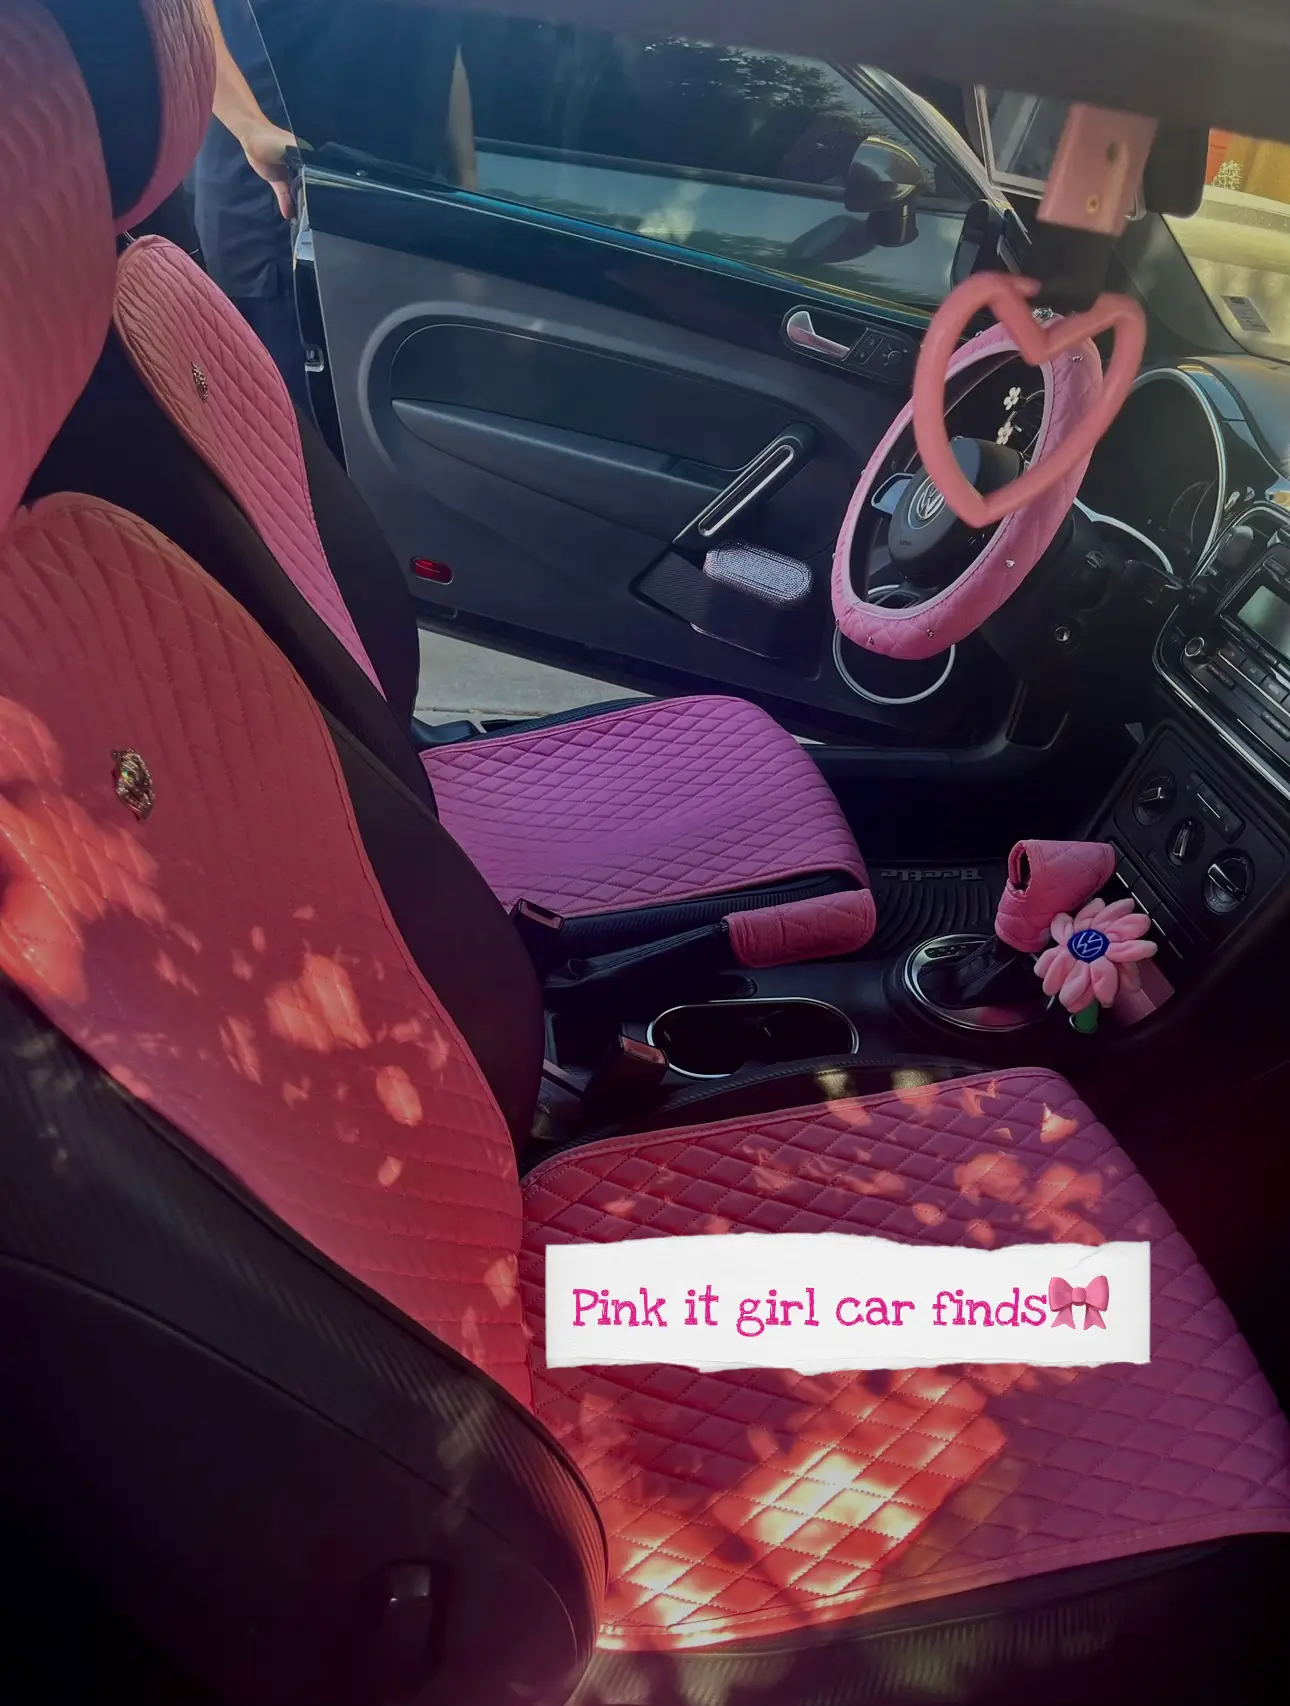 Pink it girl car finds🎀, Gallery posted by mars🧚🏻‍♀️🌸